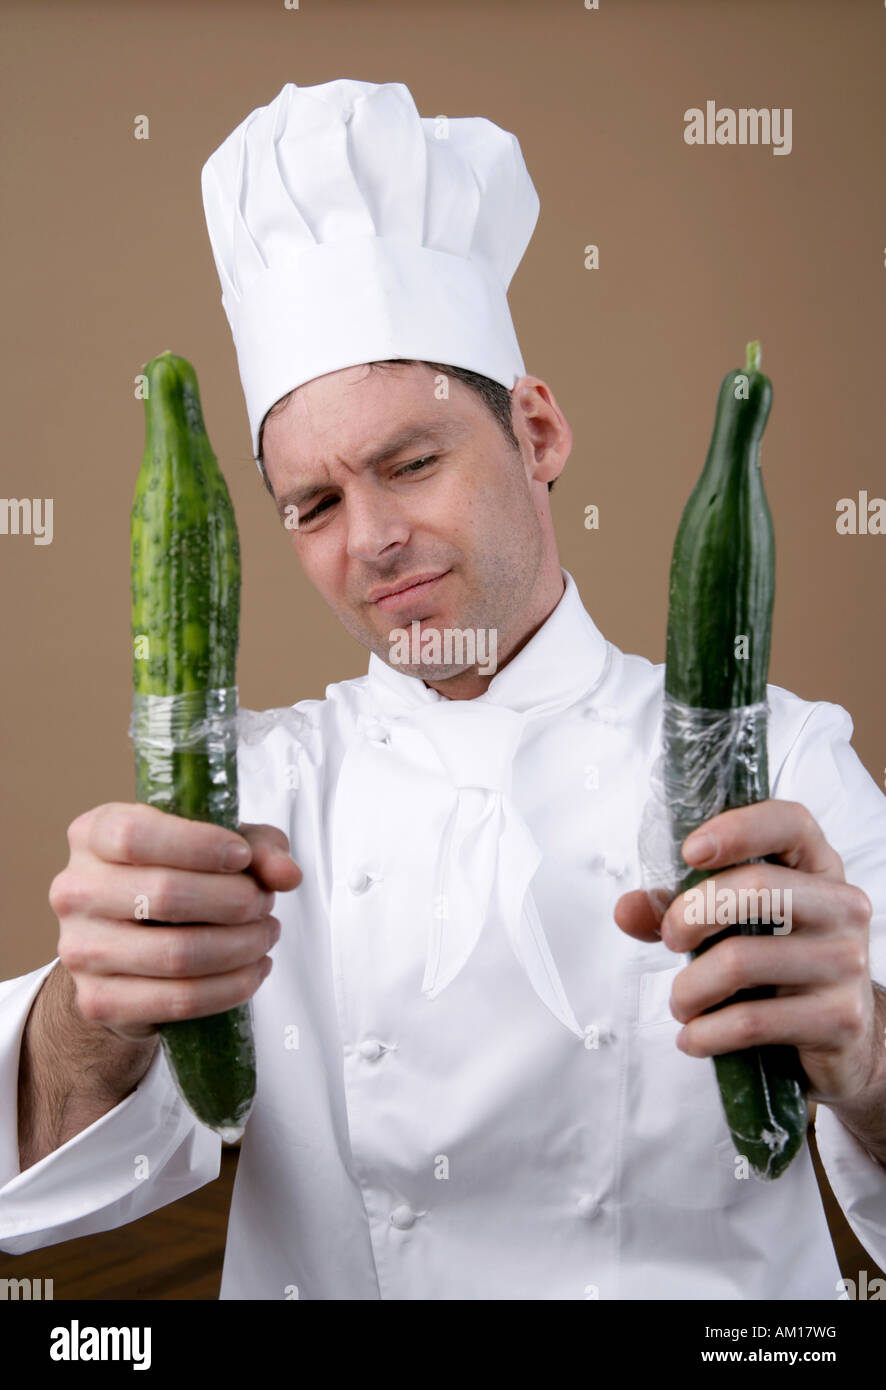 Cook looking sceptical at two cucumbers Stock Photo